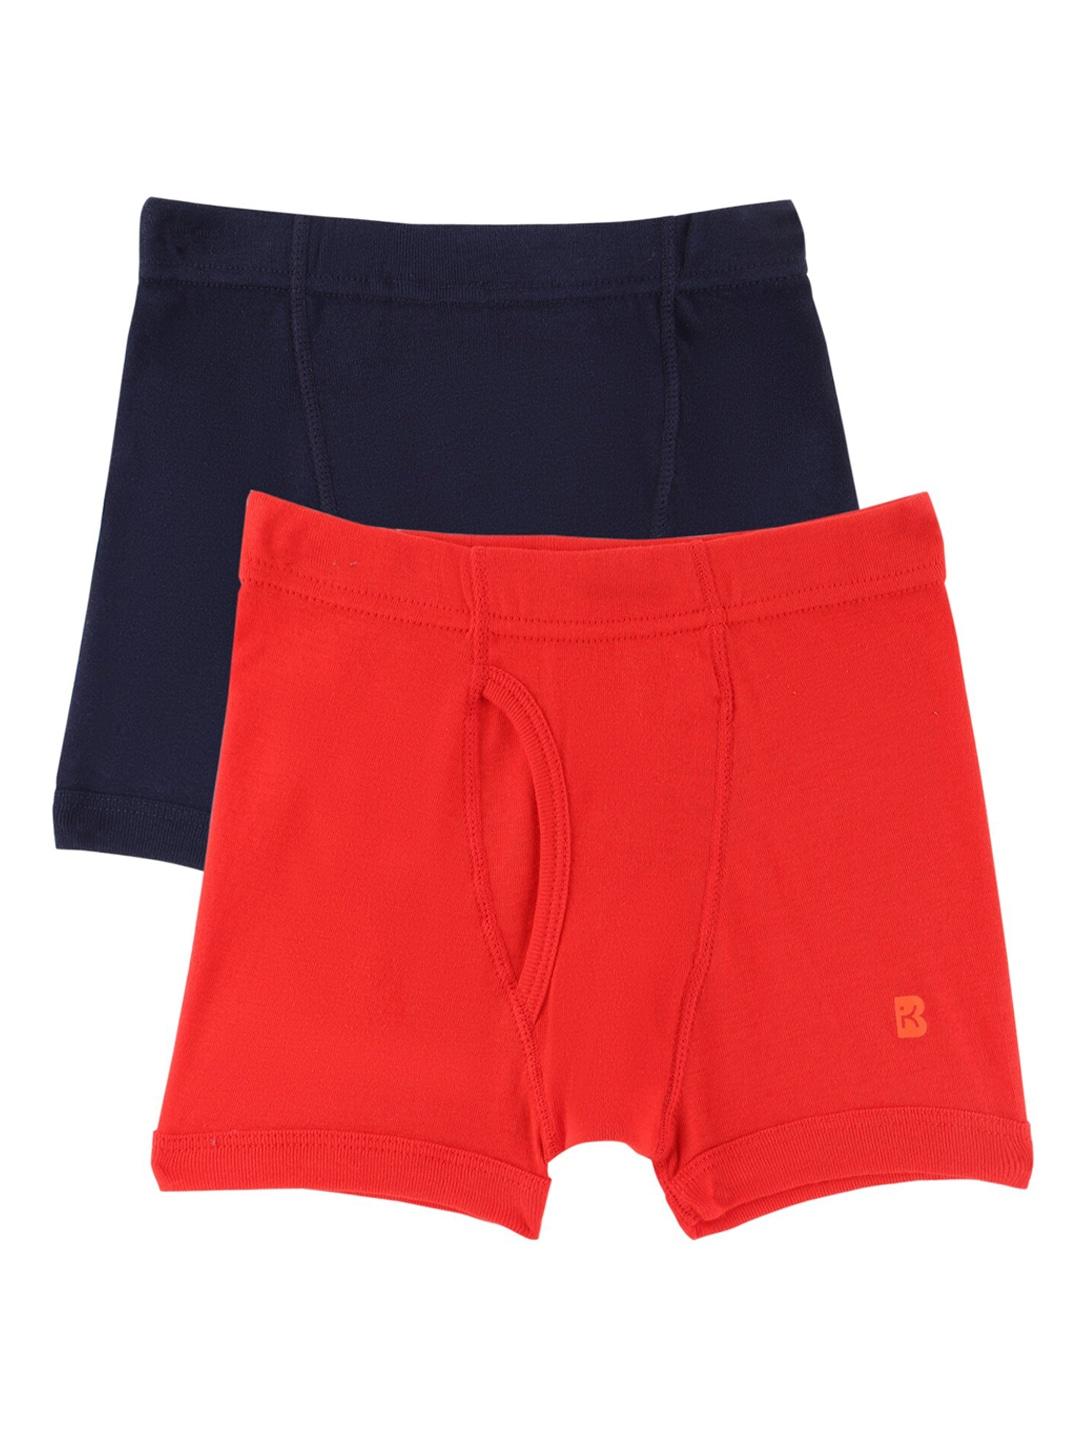 bodycare-kids-boys-pack-of-2-red-&-navy-blue-solid-cotton-trunk